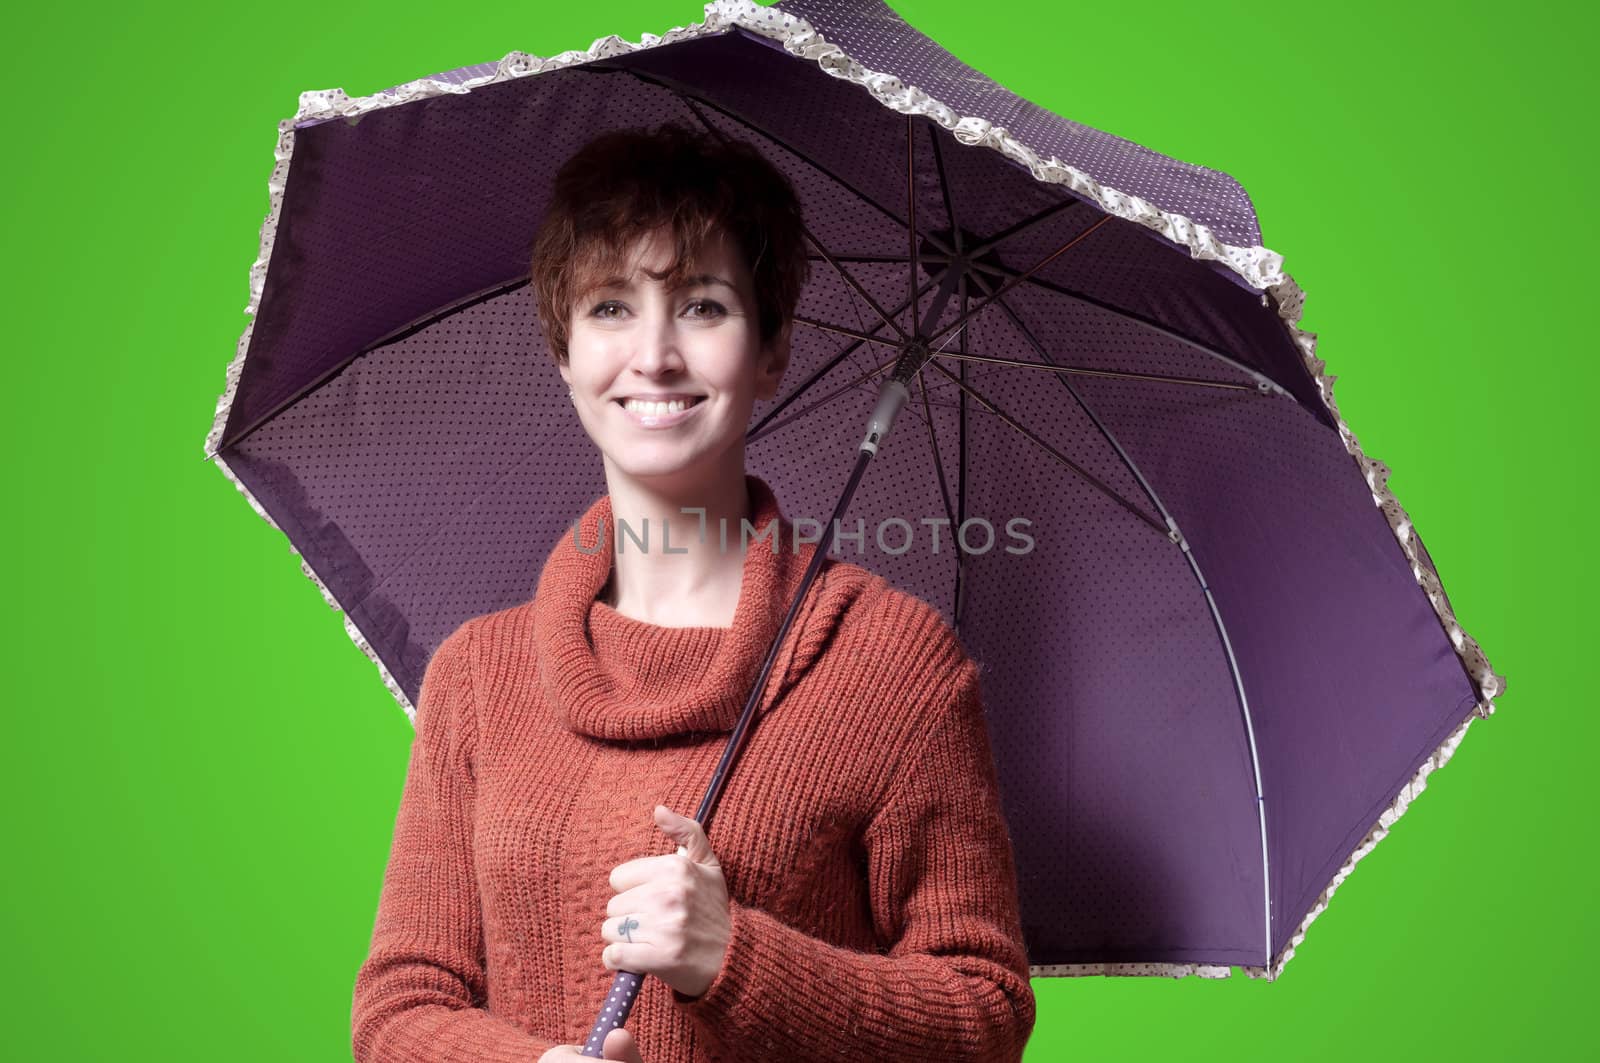 beautiful woman with sweater and umbrella on green background